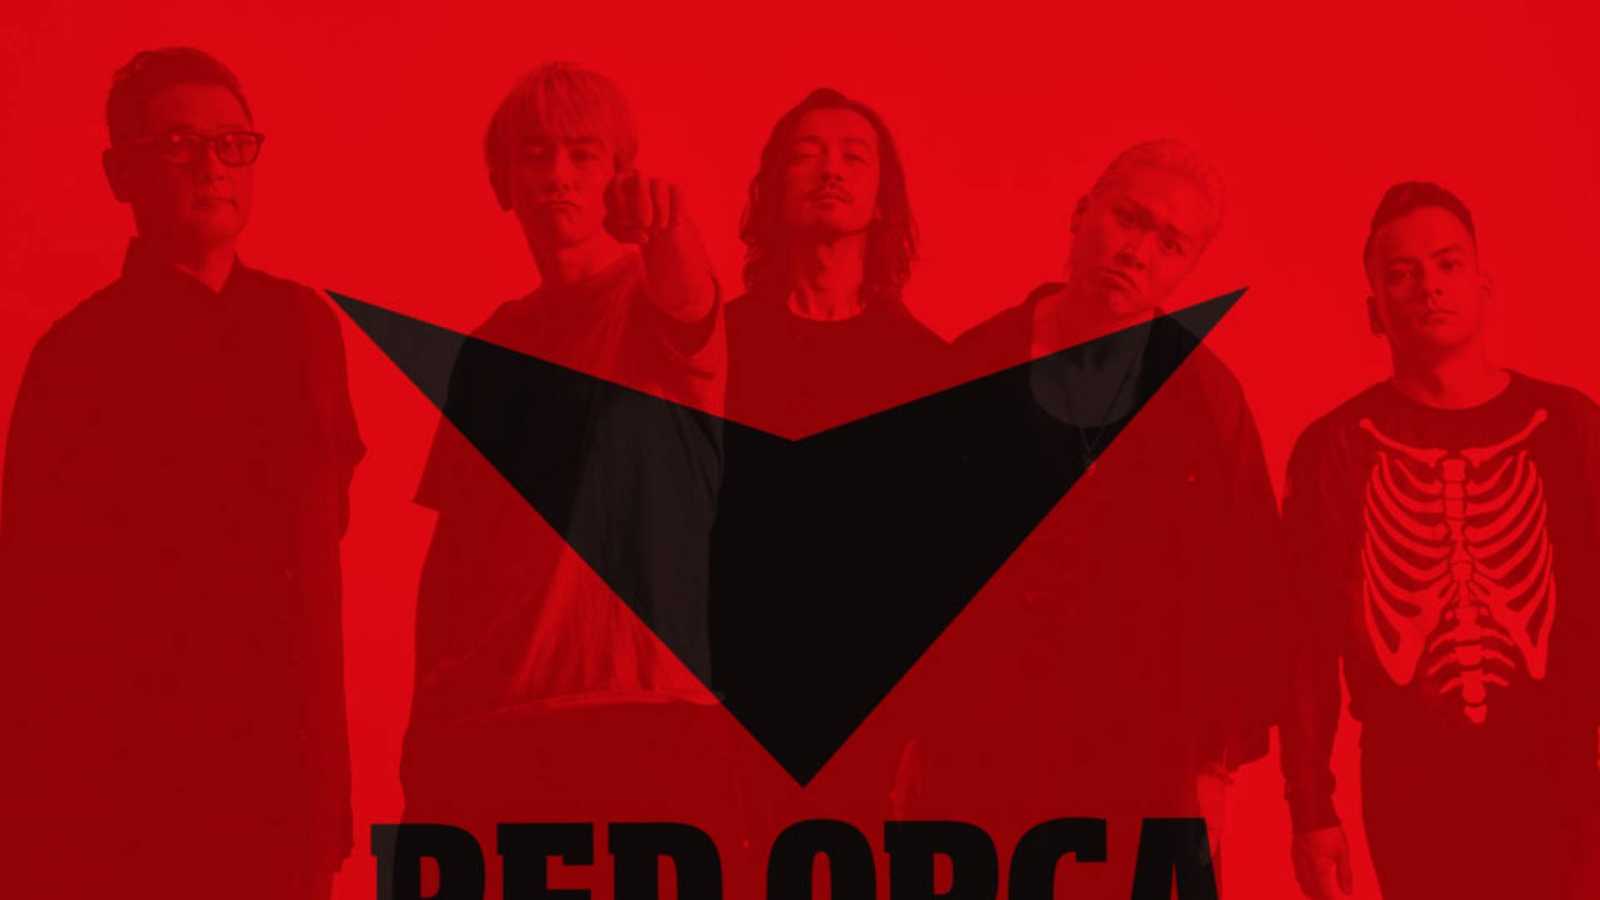 First Album from RED ORCA © RED ORCA. All rights reserved.